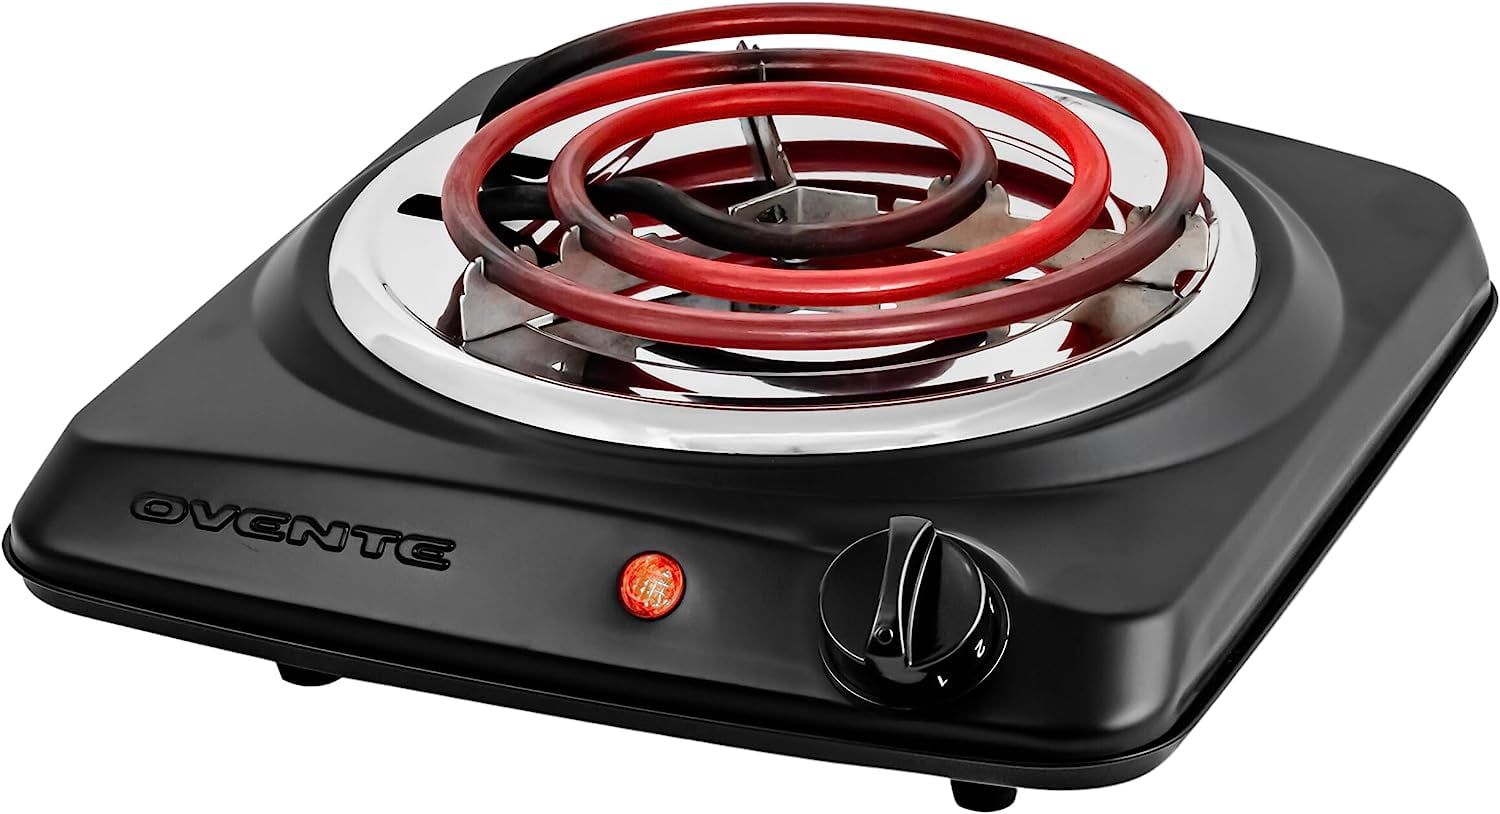  Electric Stove Burner, 500W 5.6 Inch Portable Mini Hot Plate  for Cooking, Mini Electric Stove Hot Plate Home Heater, Multifunctional  Heating Plate Cooktop for Dorm Office Home Camp: Home & Kitchen